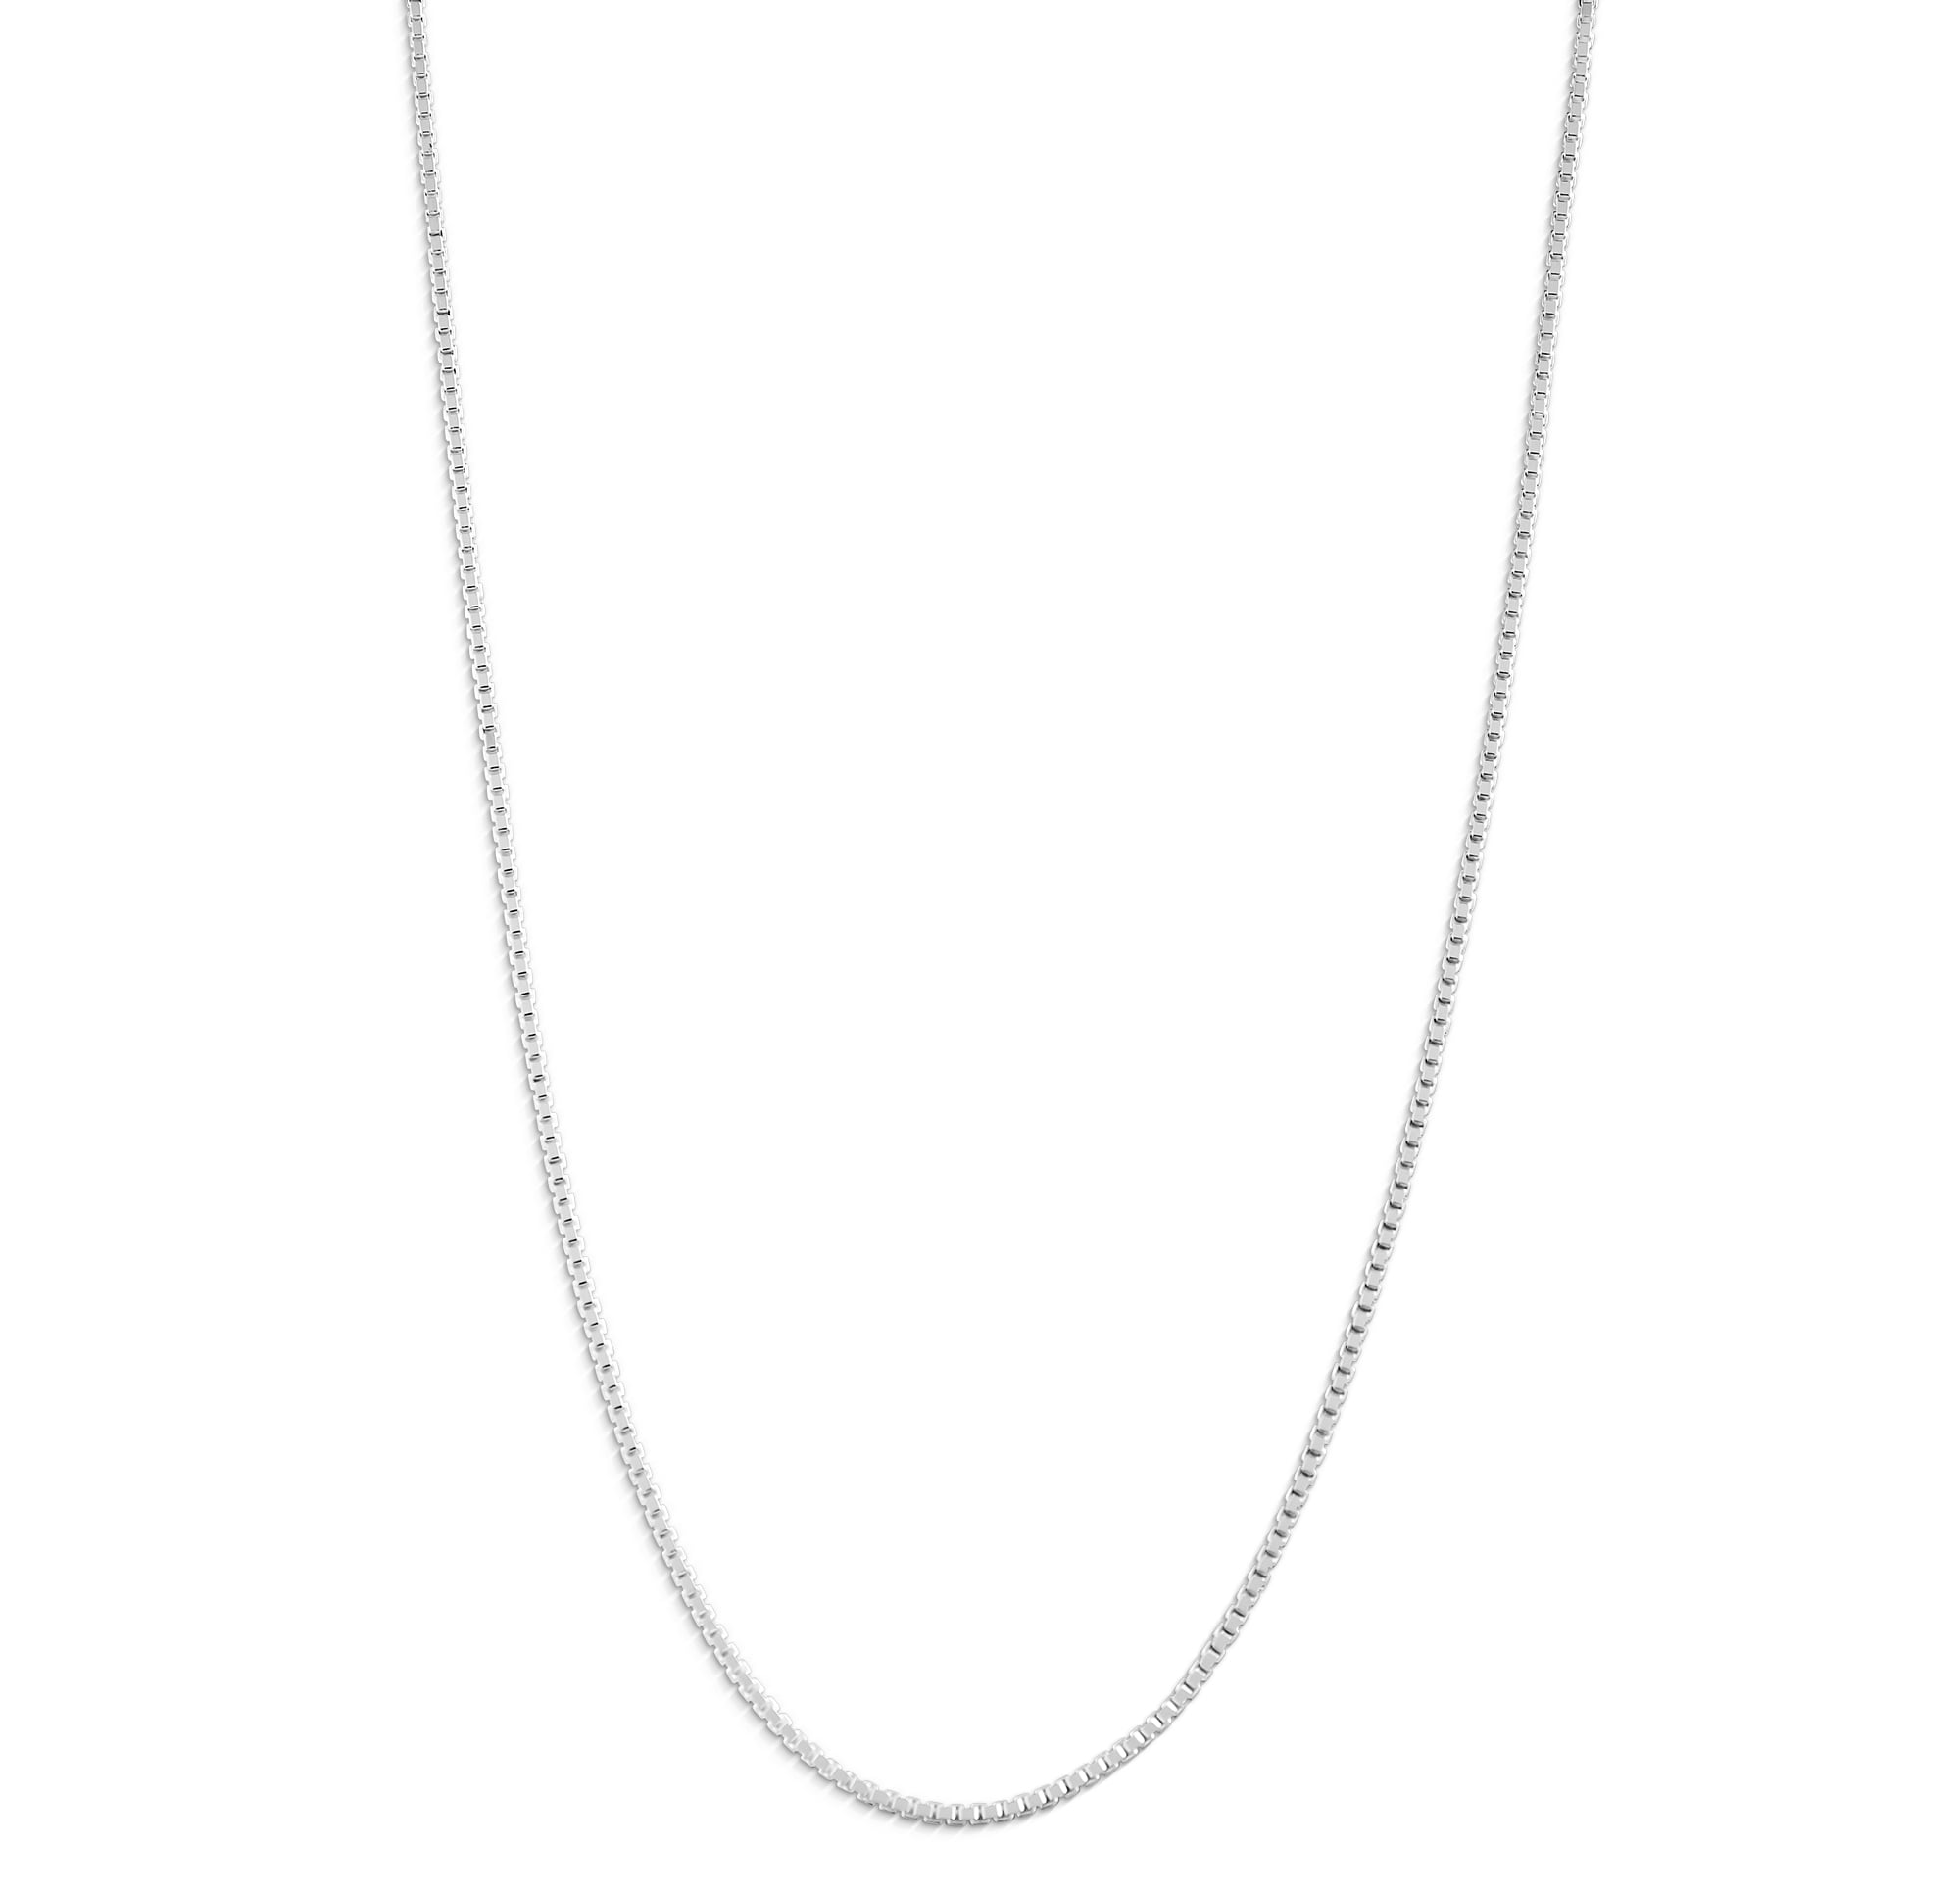 Details about   Southwestern Jewelry Sterling Silver Box Chain Necklace 24" Long x 1MM 